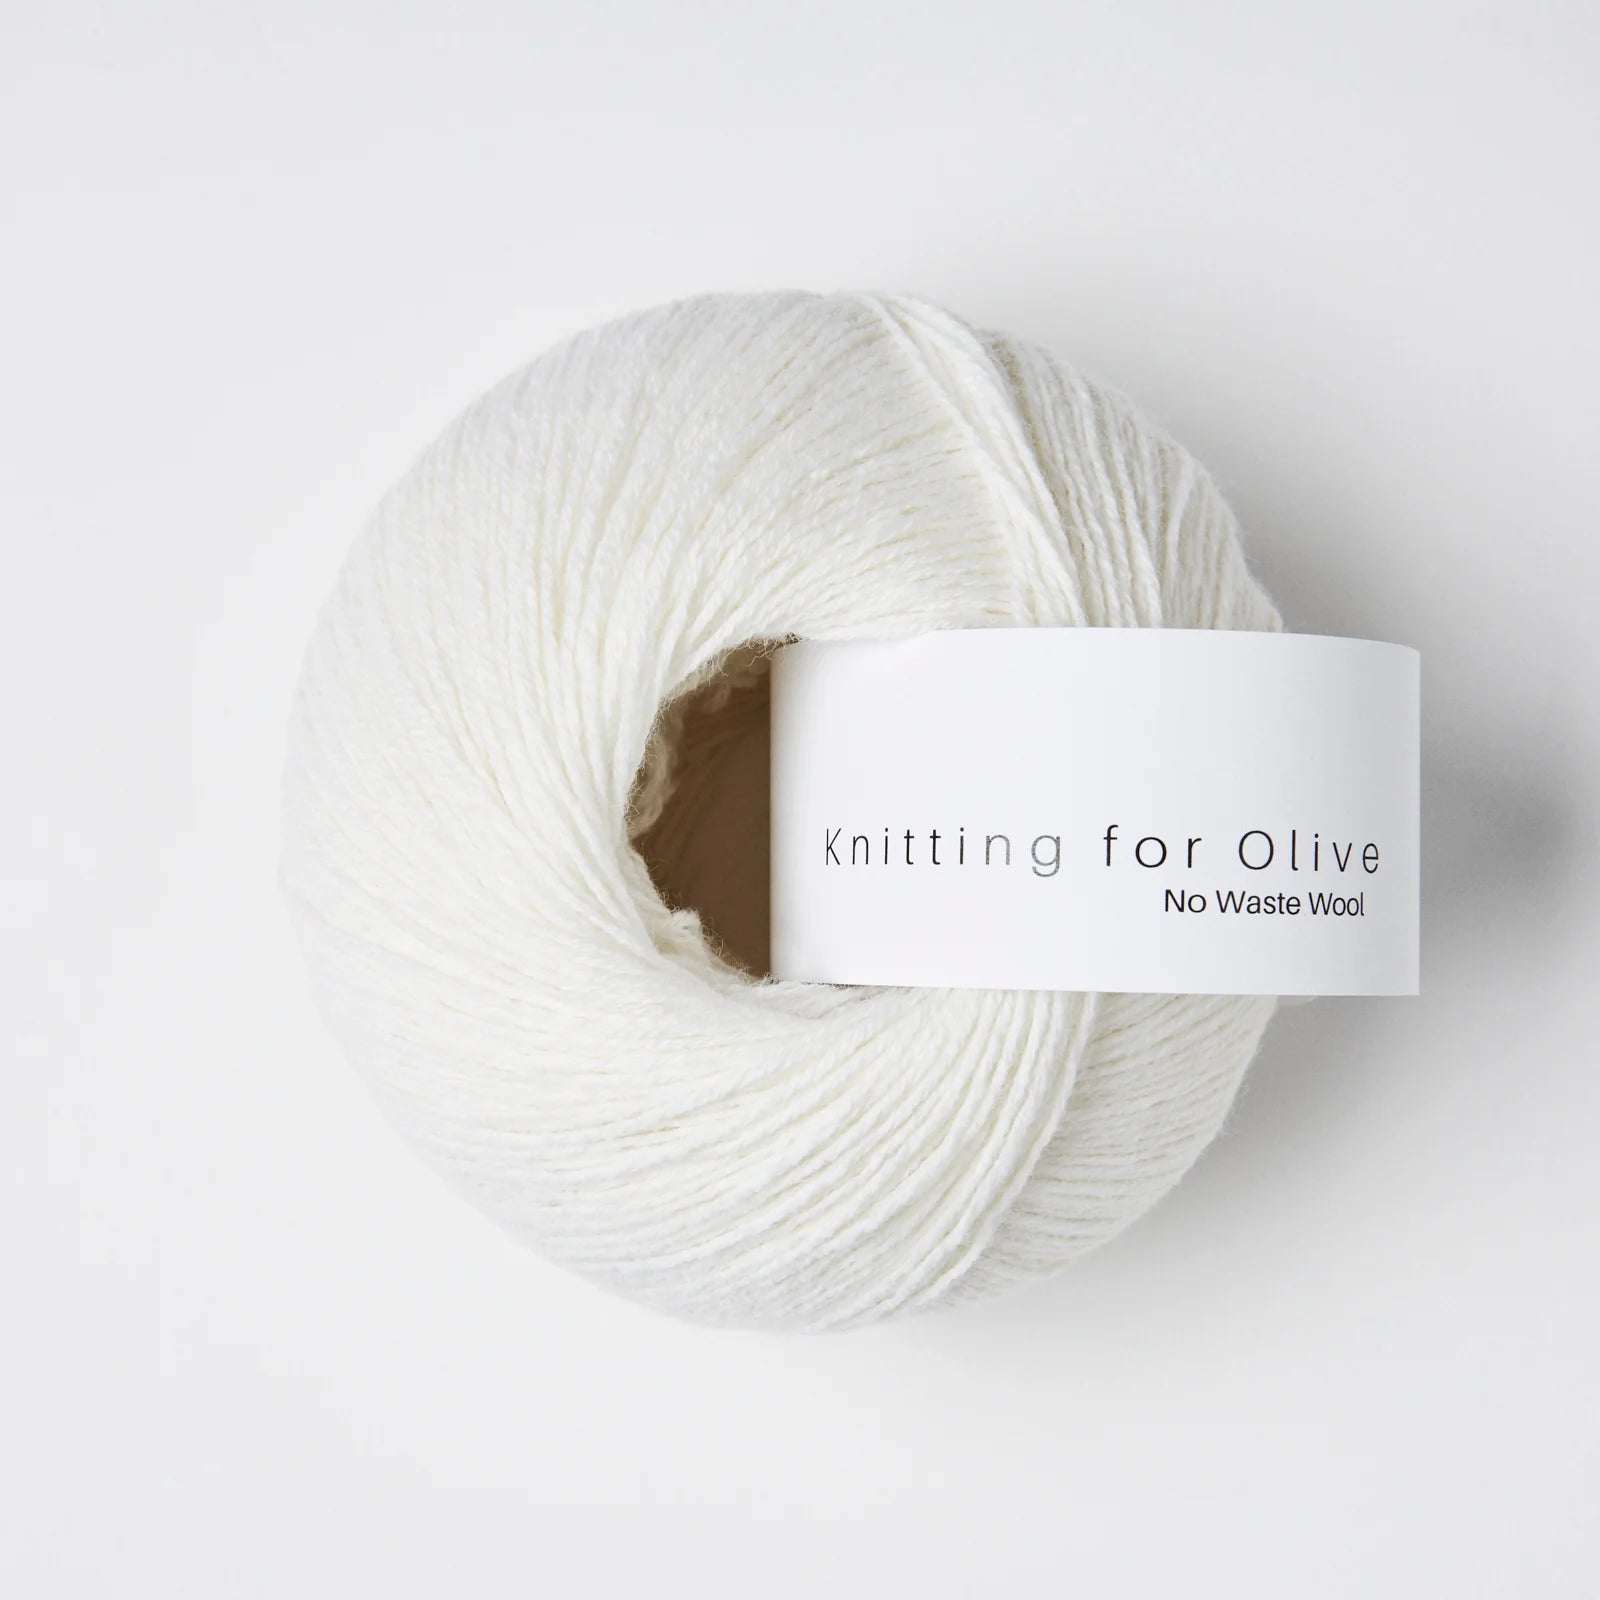 Knitting for Olive No Waste Wool - Knitting for Olive - Cream - The Little Yarn Store